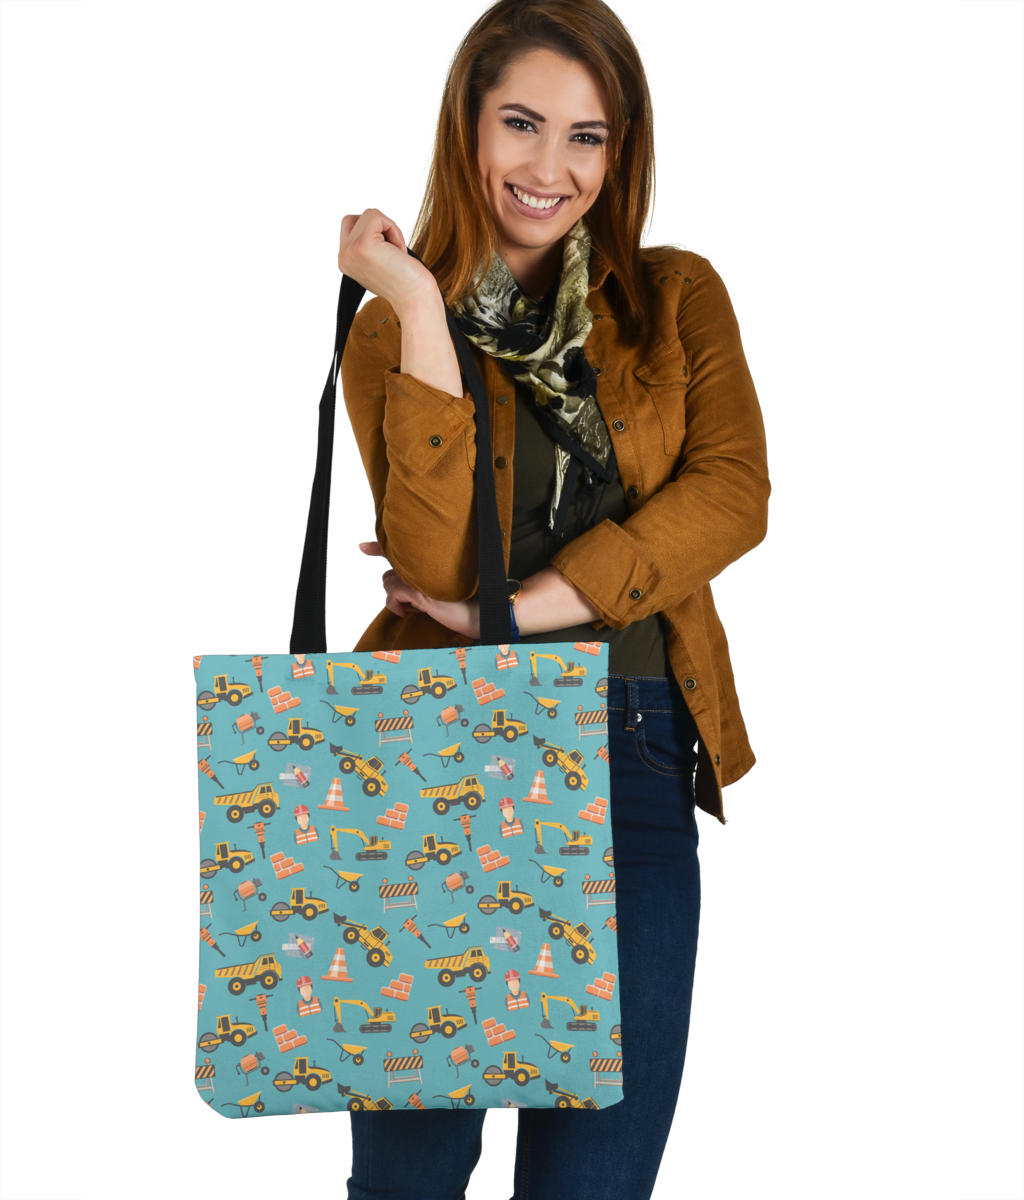 Construction Pattern Cloth Tote